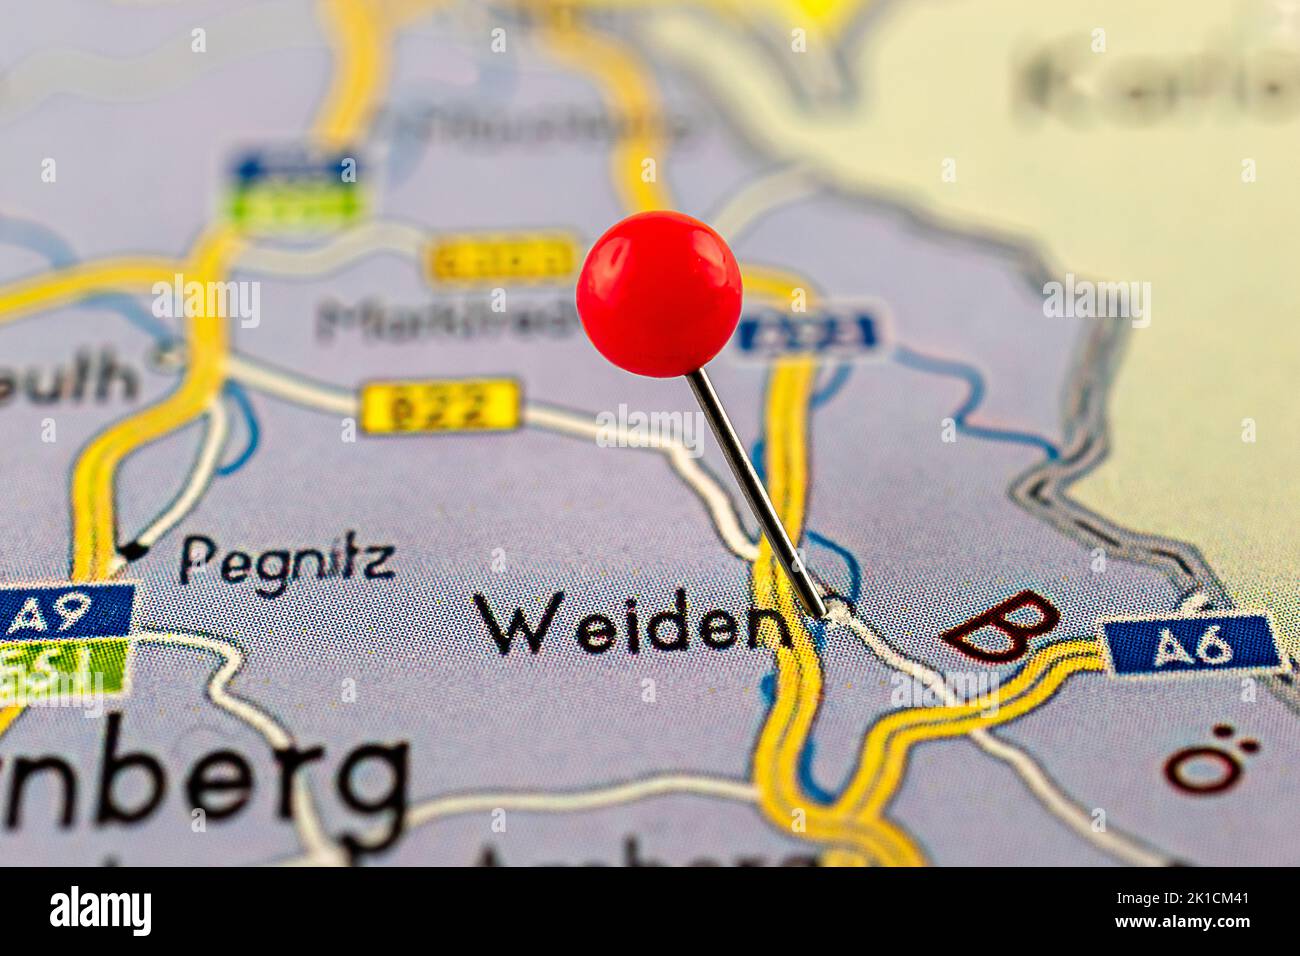 Weiden map. Close up of Weiden map with red pin. Map with red pin point of Weiden in Germany. Stock Photo